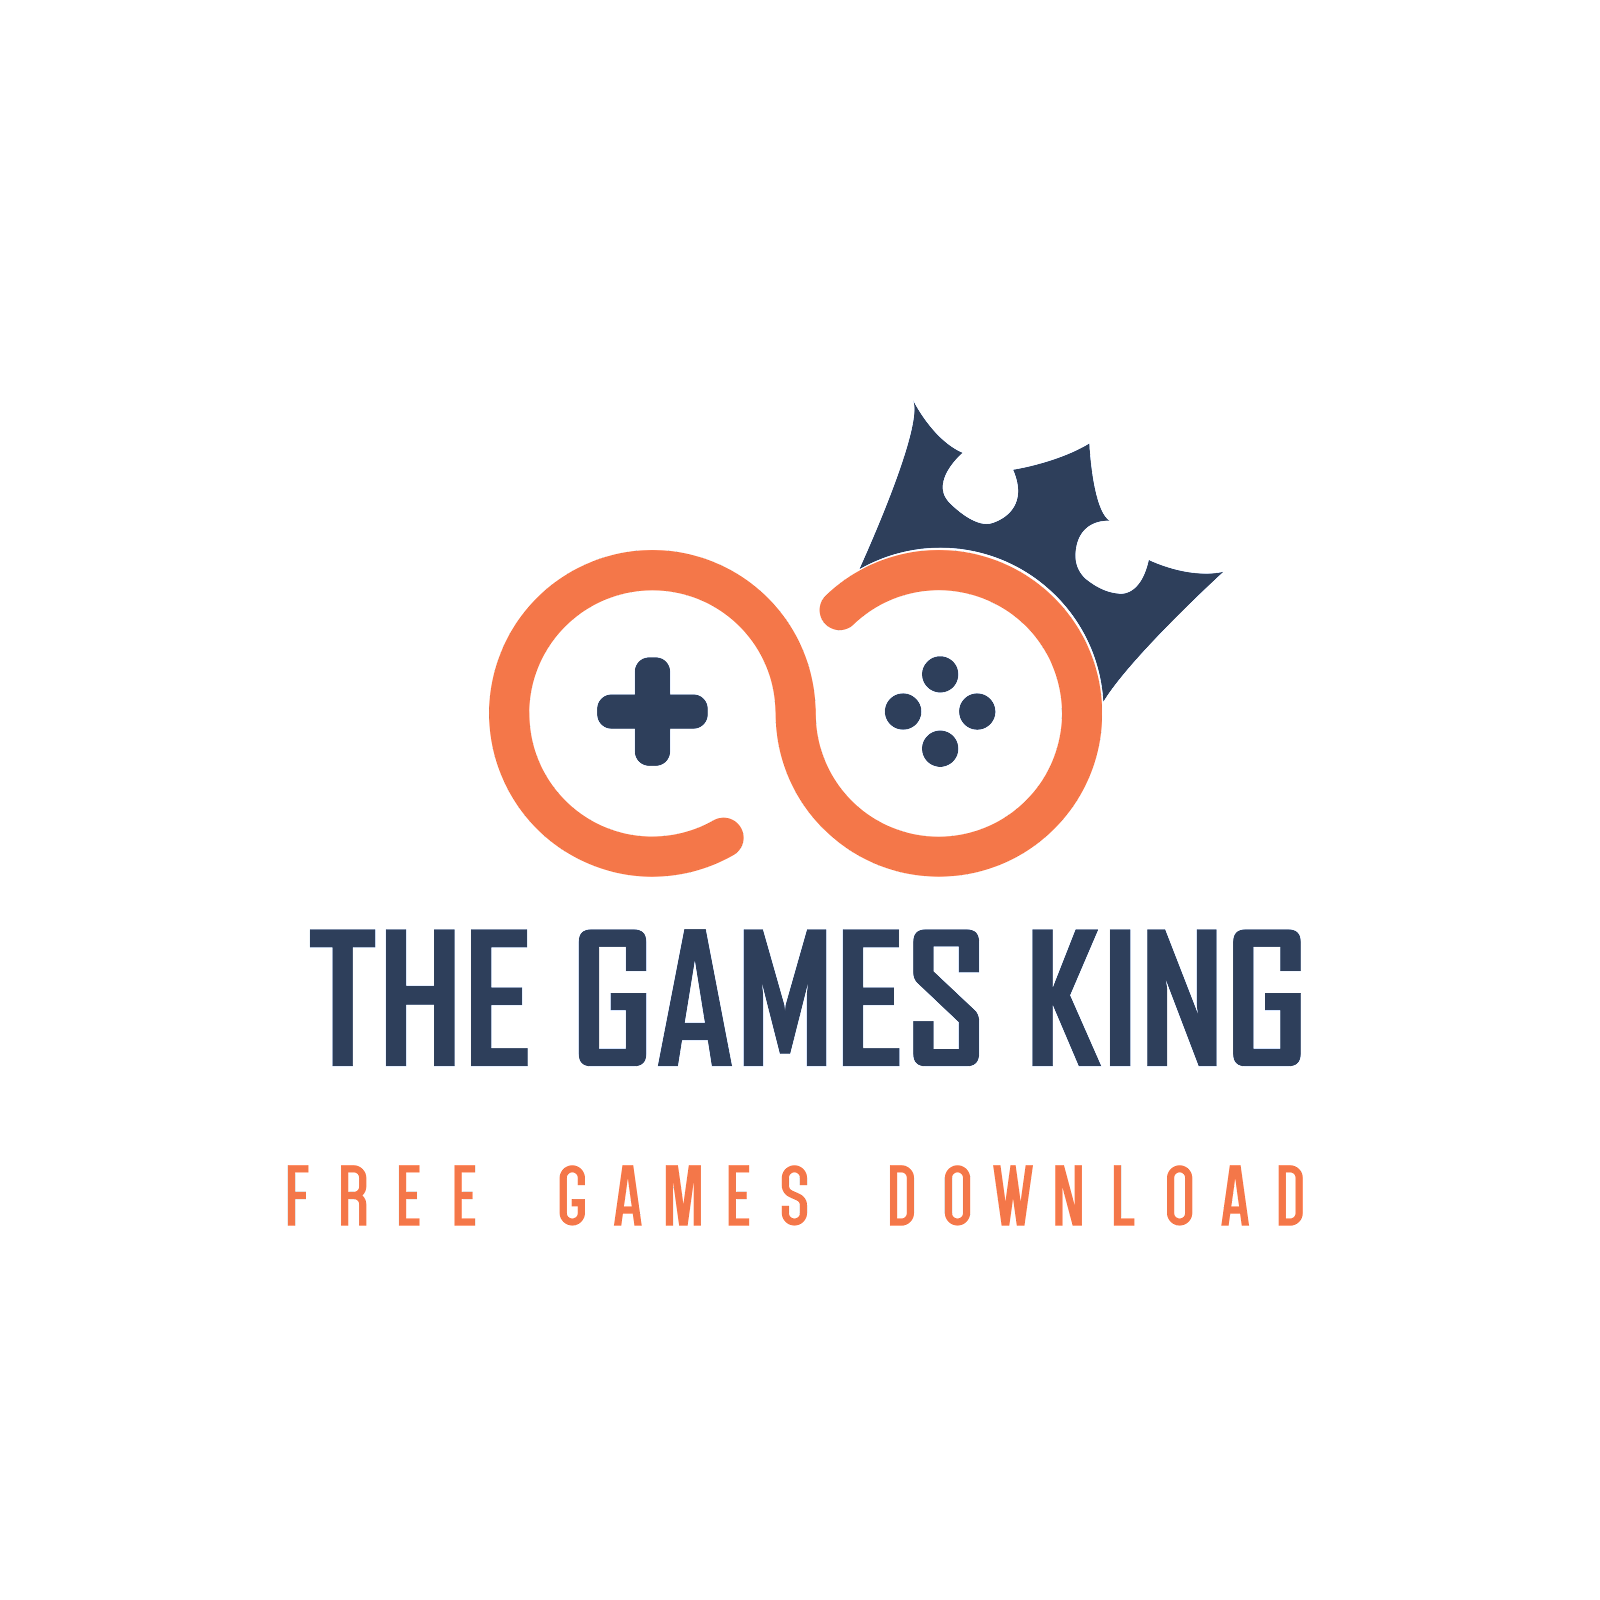 The Games King